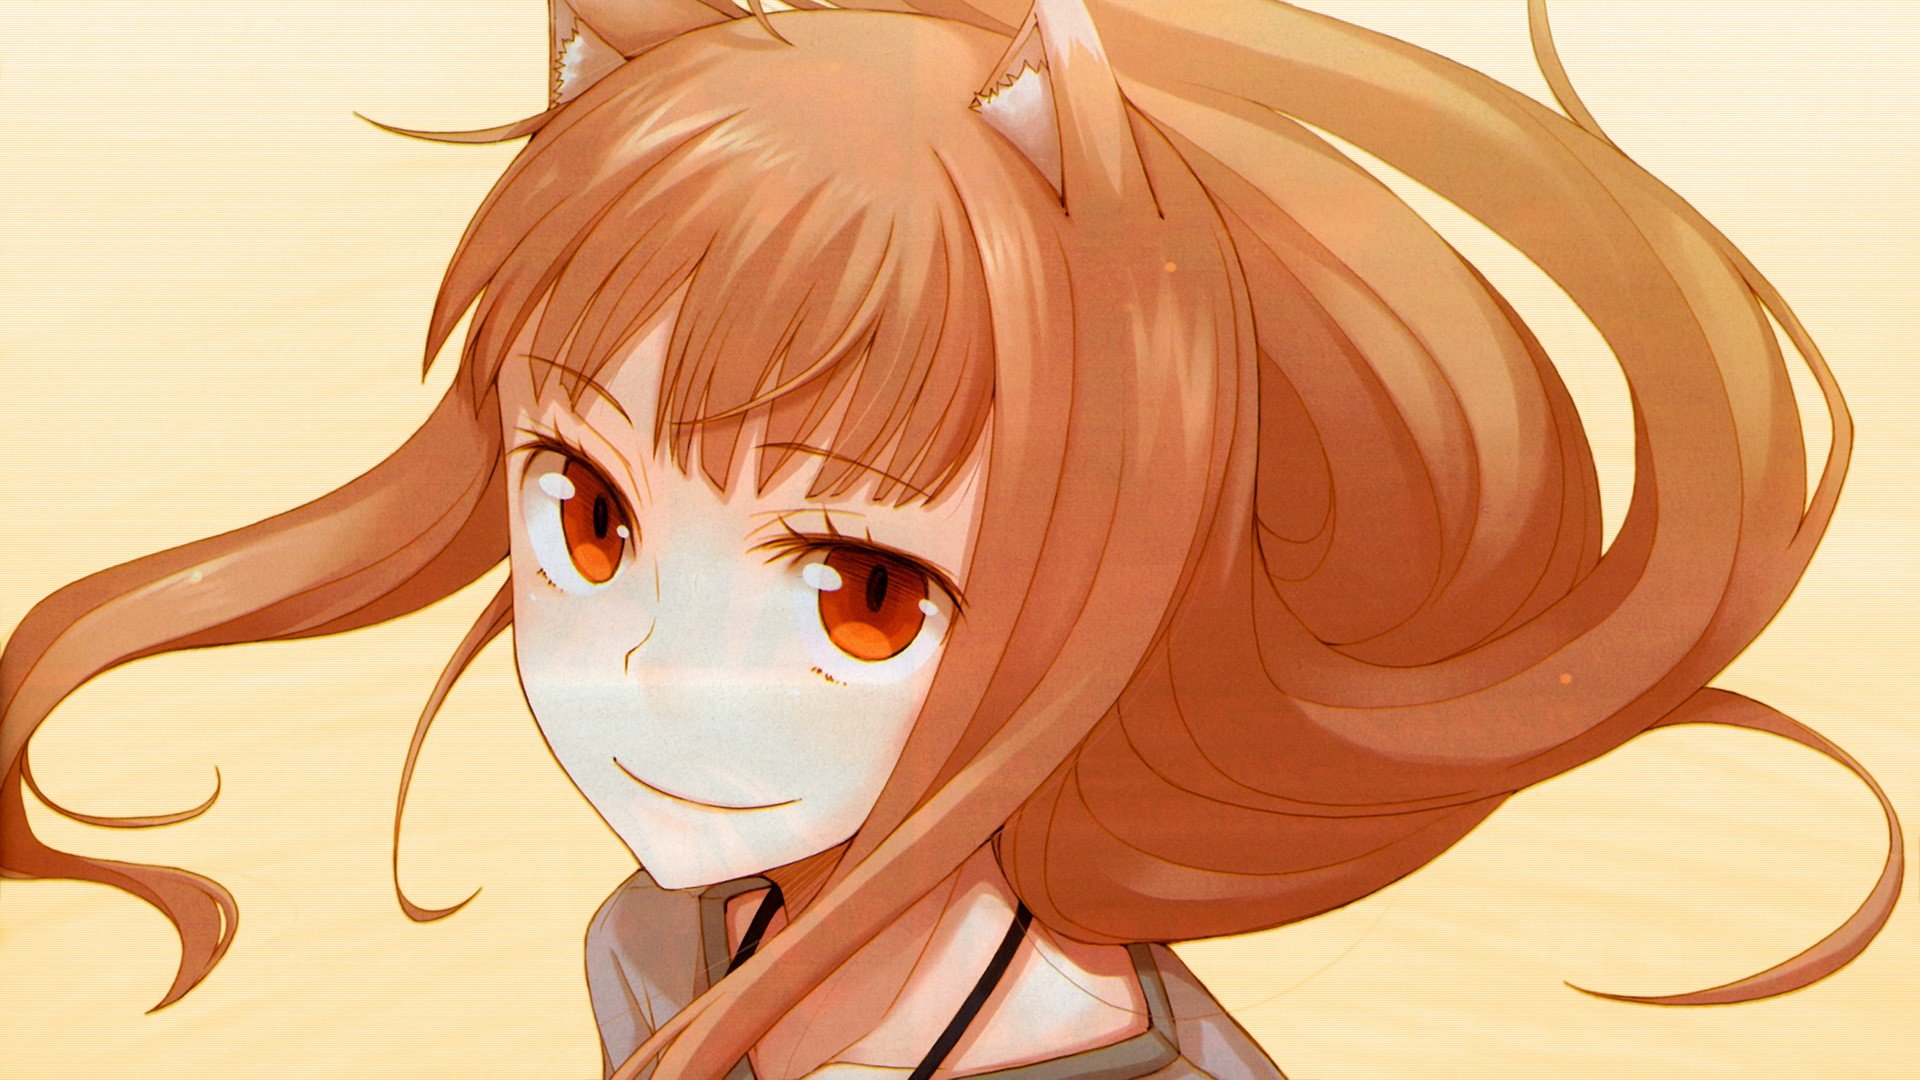 anime girls, Artwork, Holo, Spice and Wolf, Fox girl Wallpaper